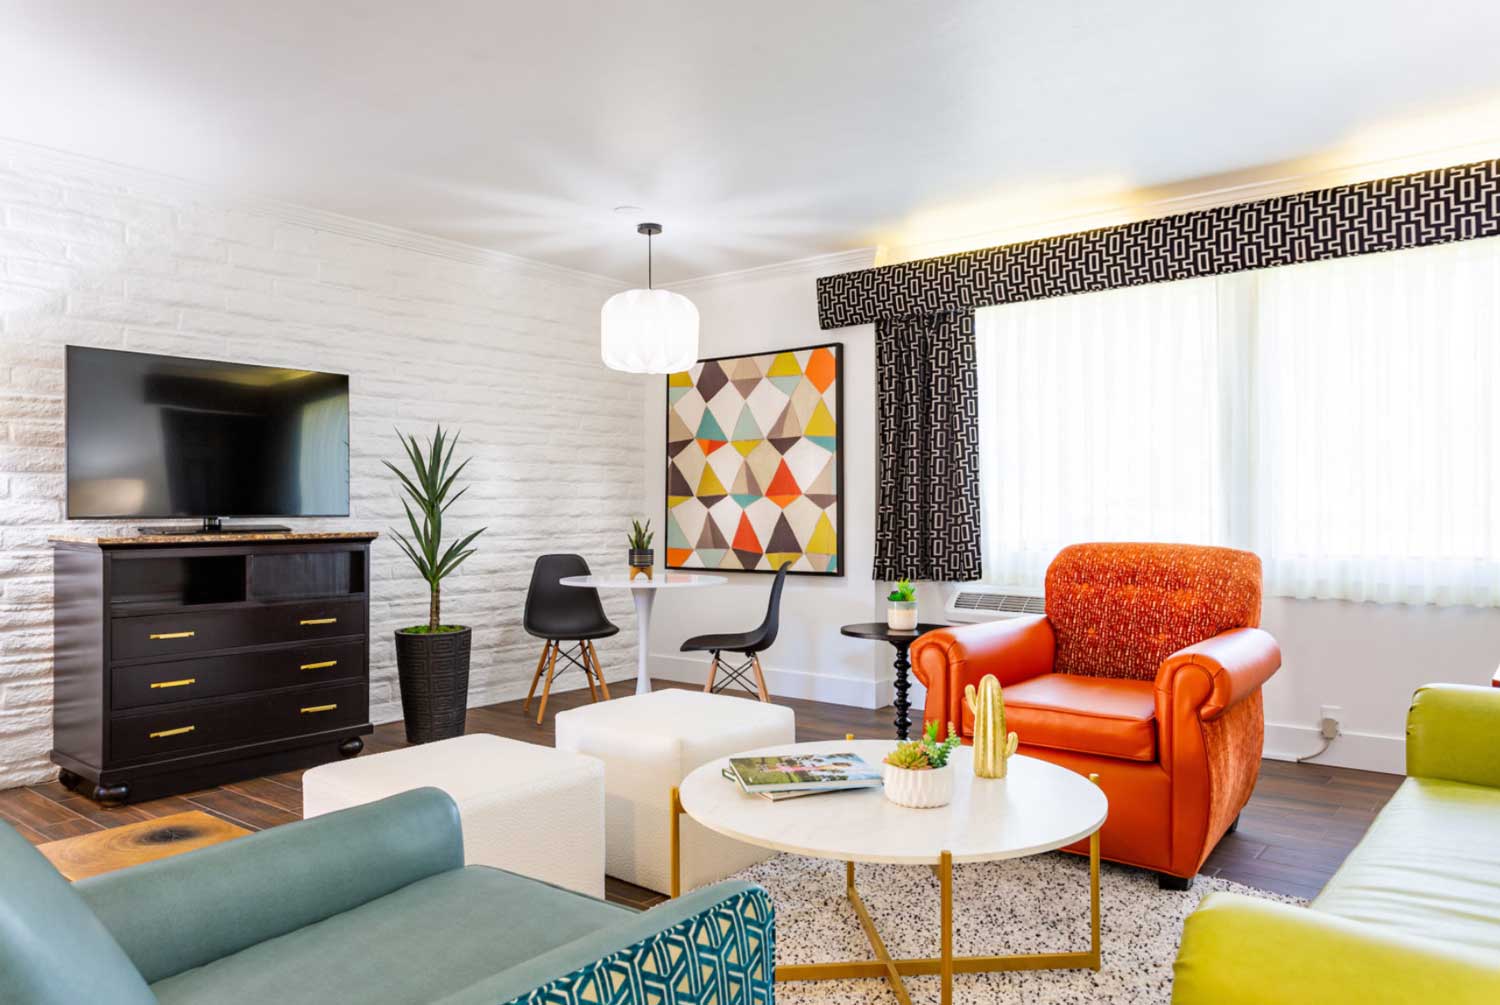 Retro hotel living room with teal, ivory, and orange furniture